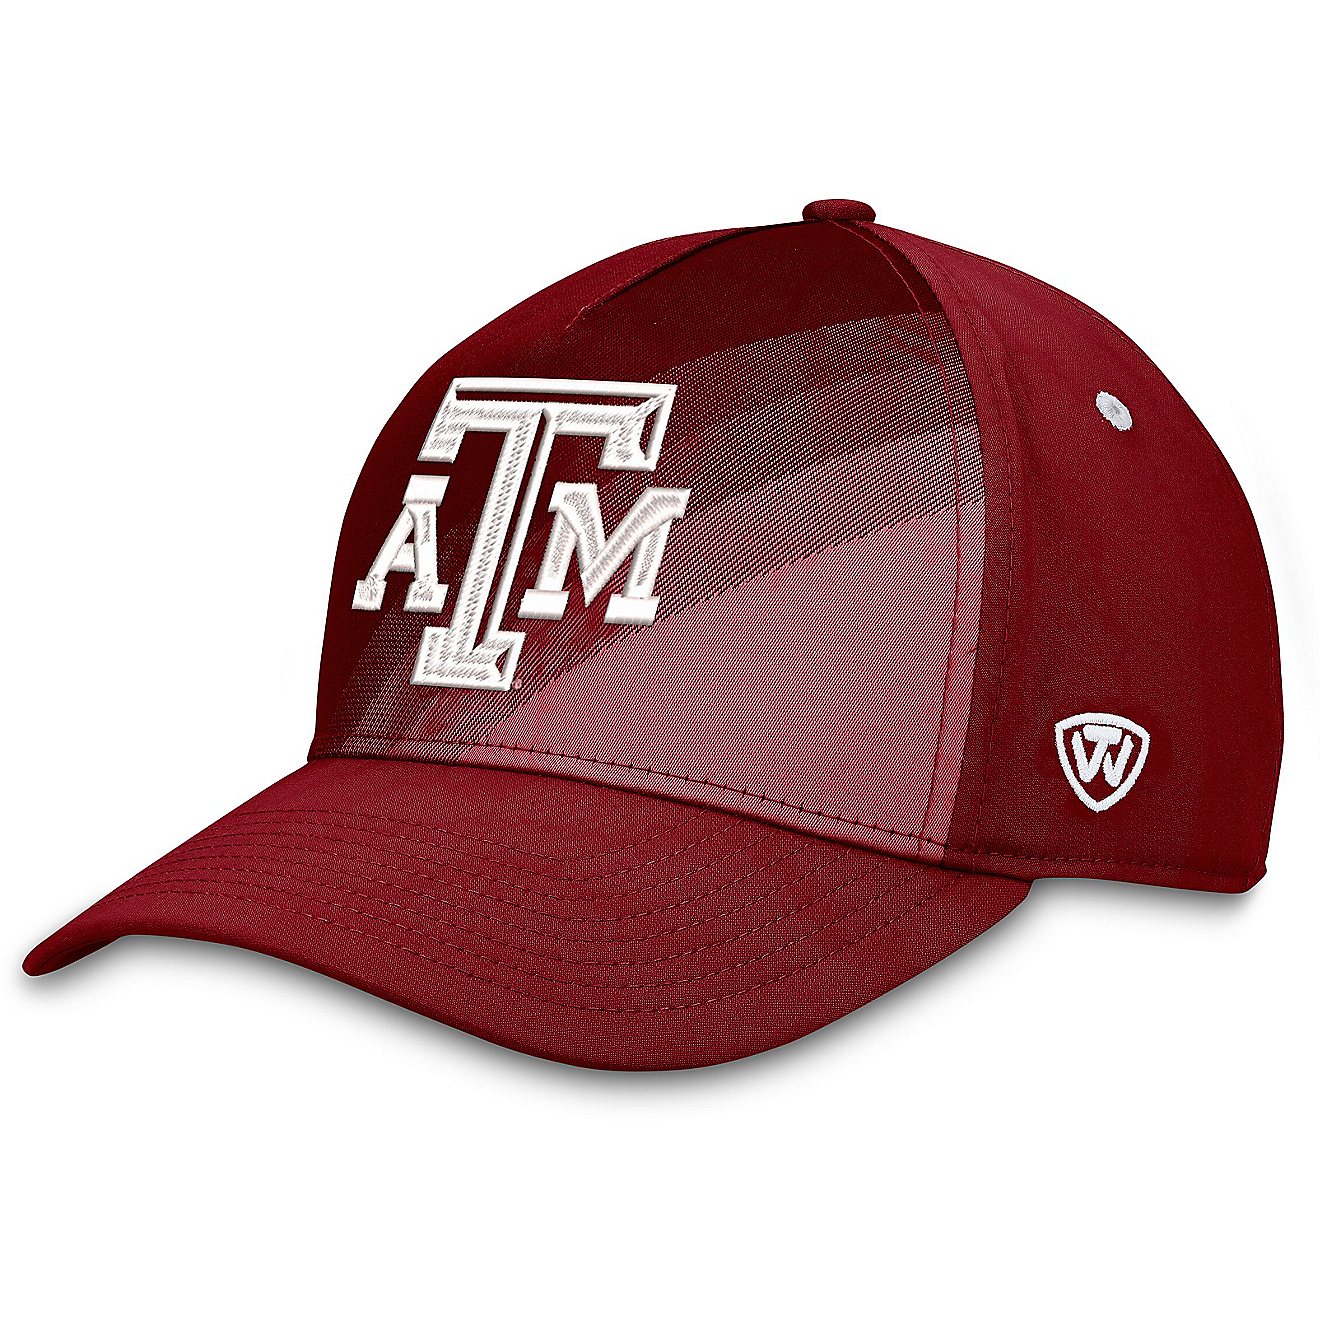 Top of the World Adults' Texas A&M University Gradient Team Color Cap                                                            - view number 1